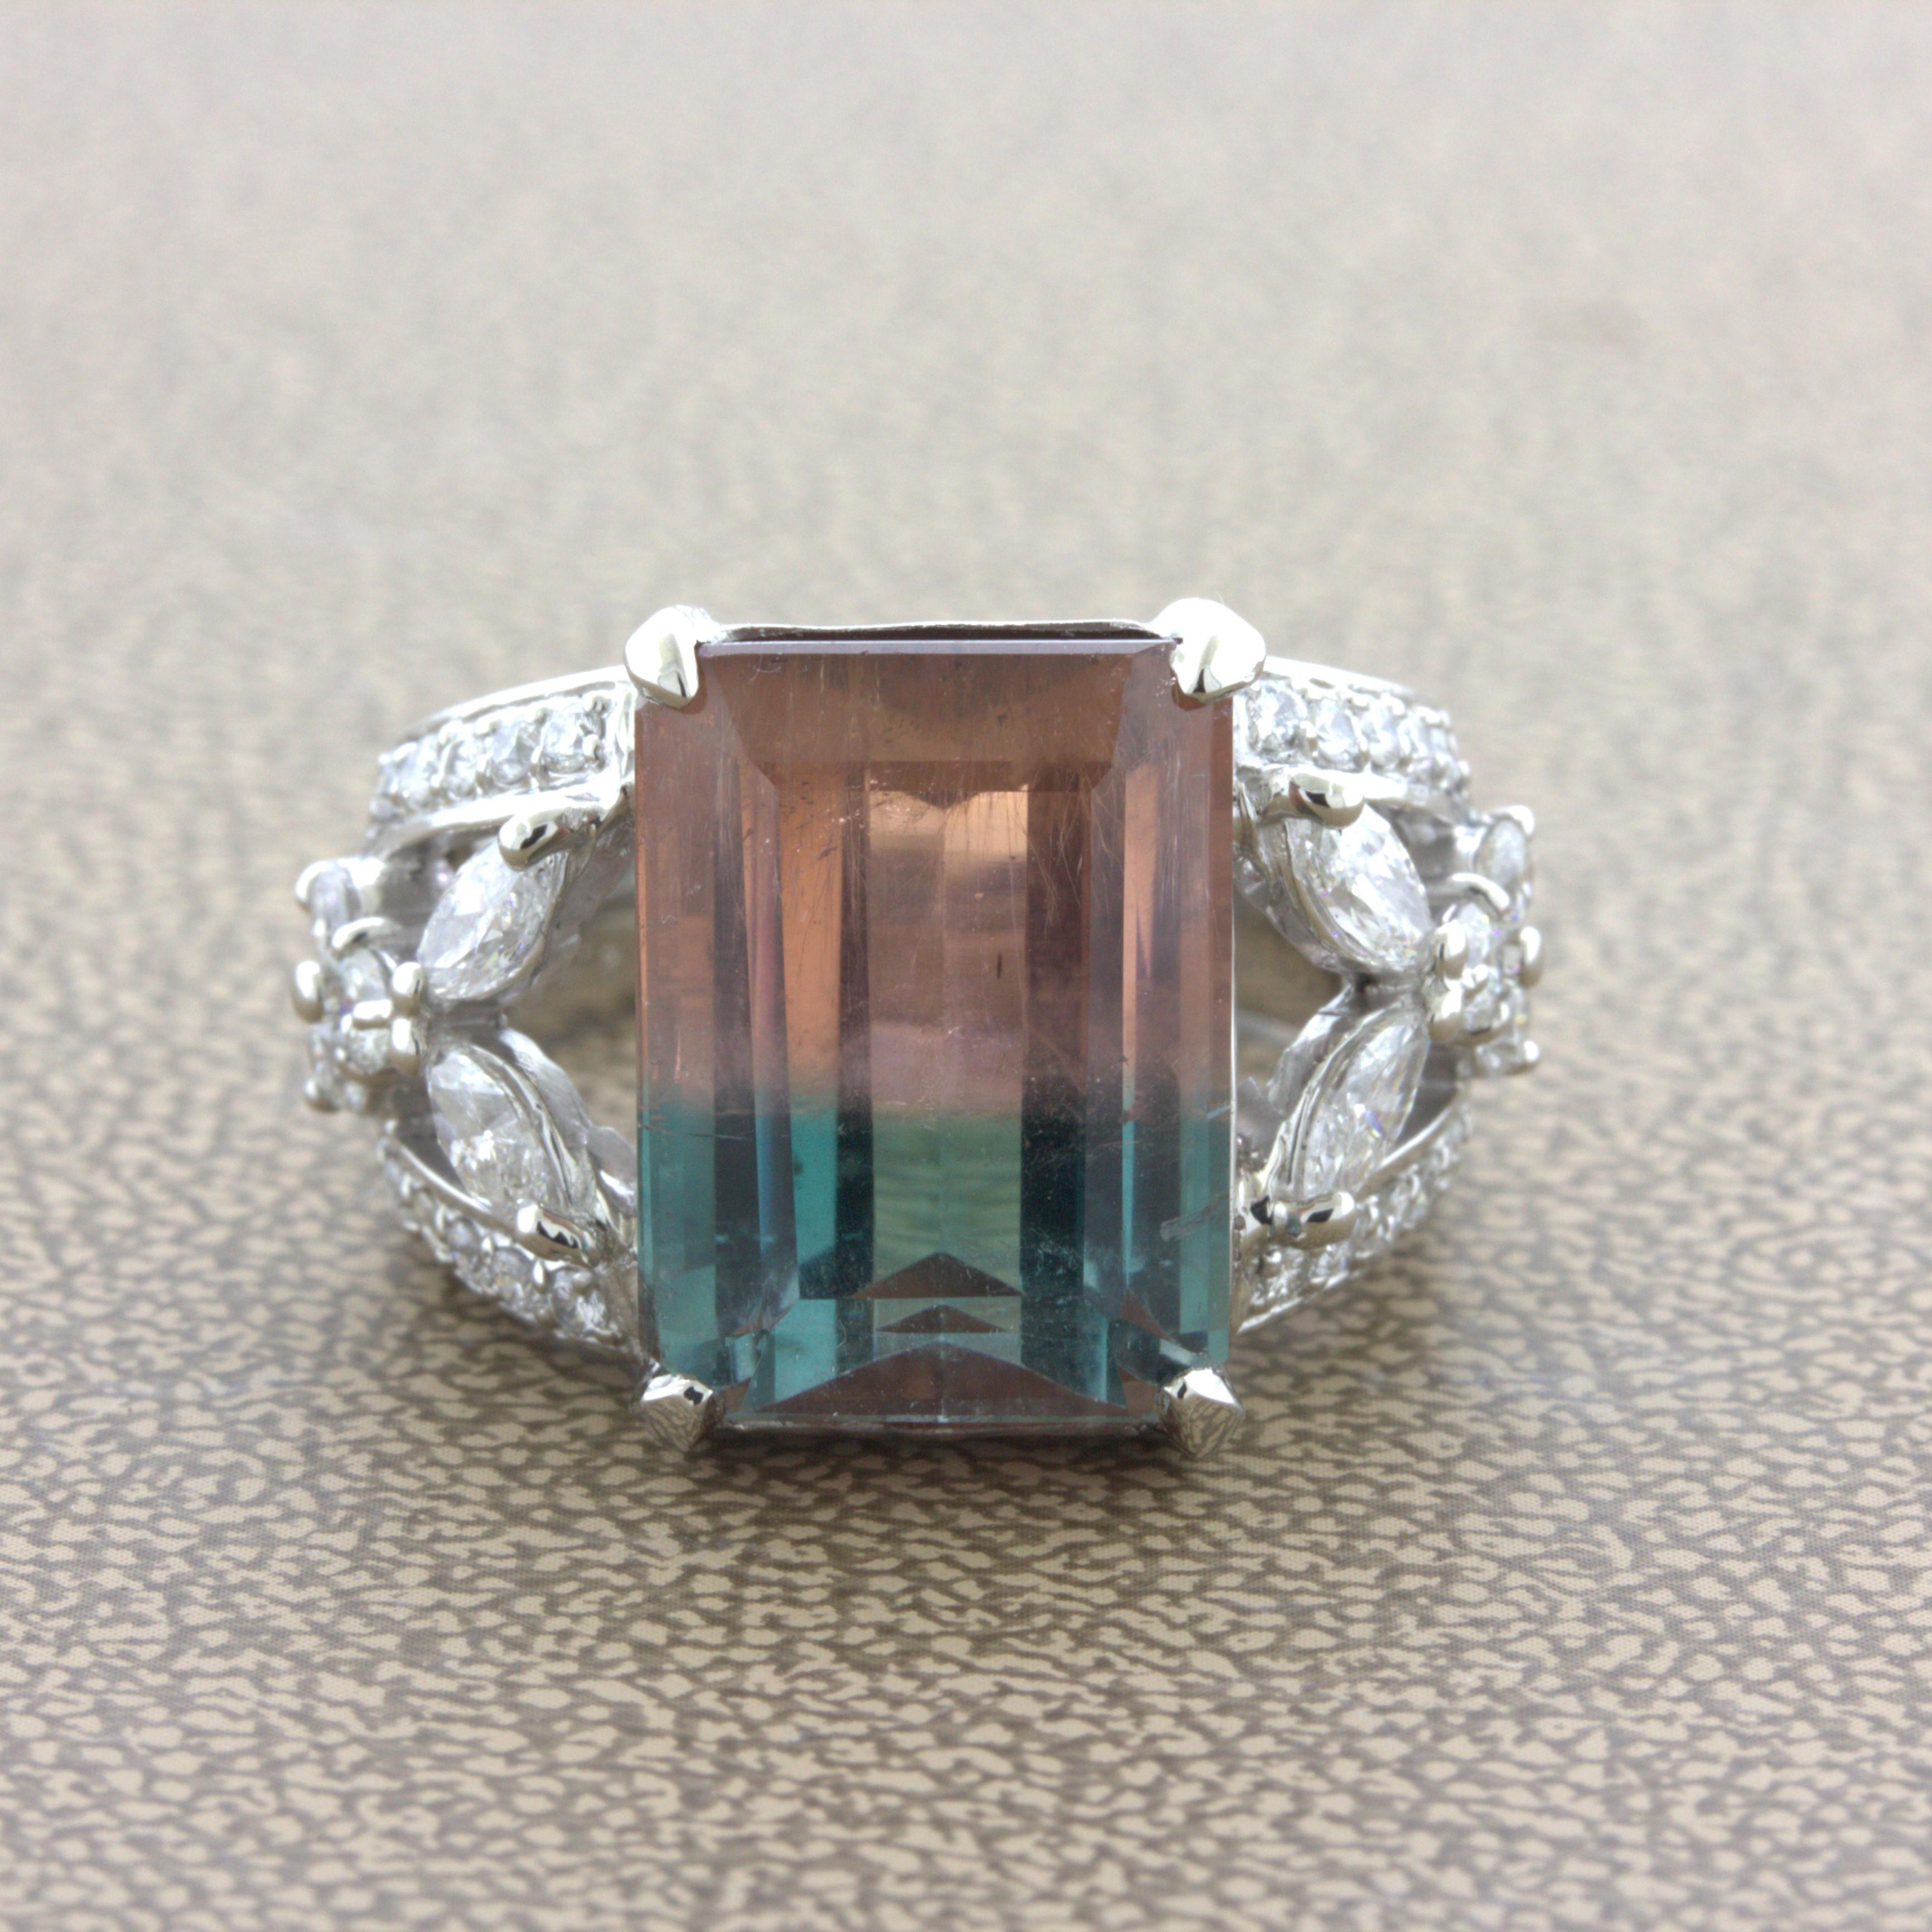 A lovely platinum ring featuring a unique bicolor tourmaline. The tourmaline weighs 12.32 carats and has a unique mix of colors. It is pink on one end and an indicolite blue on the other! Usually, we see bicolor watermelon tourmaline with a pink and